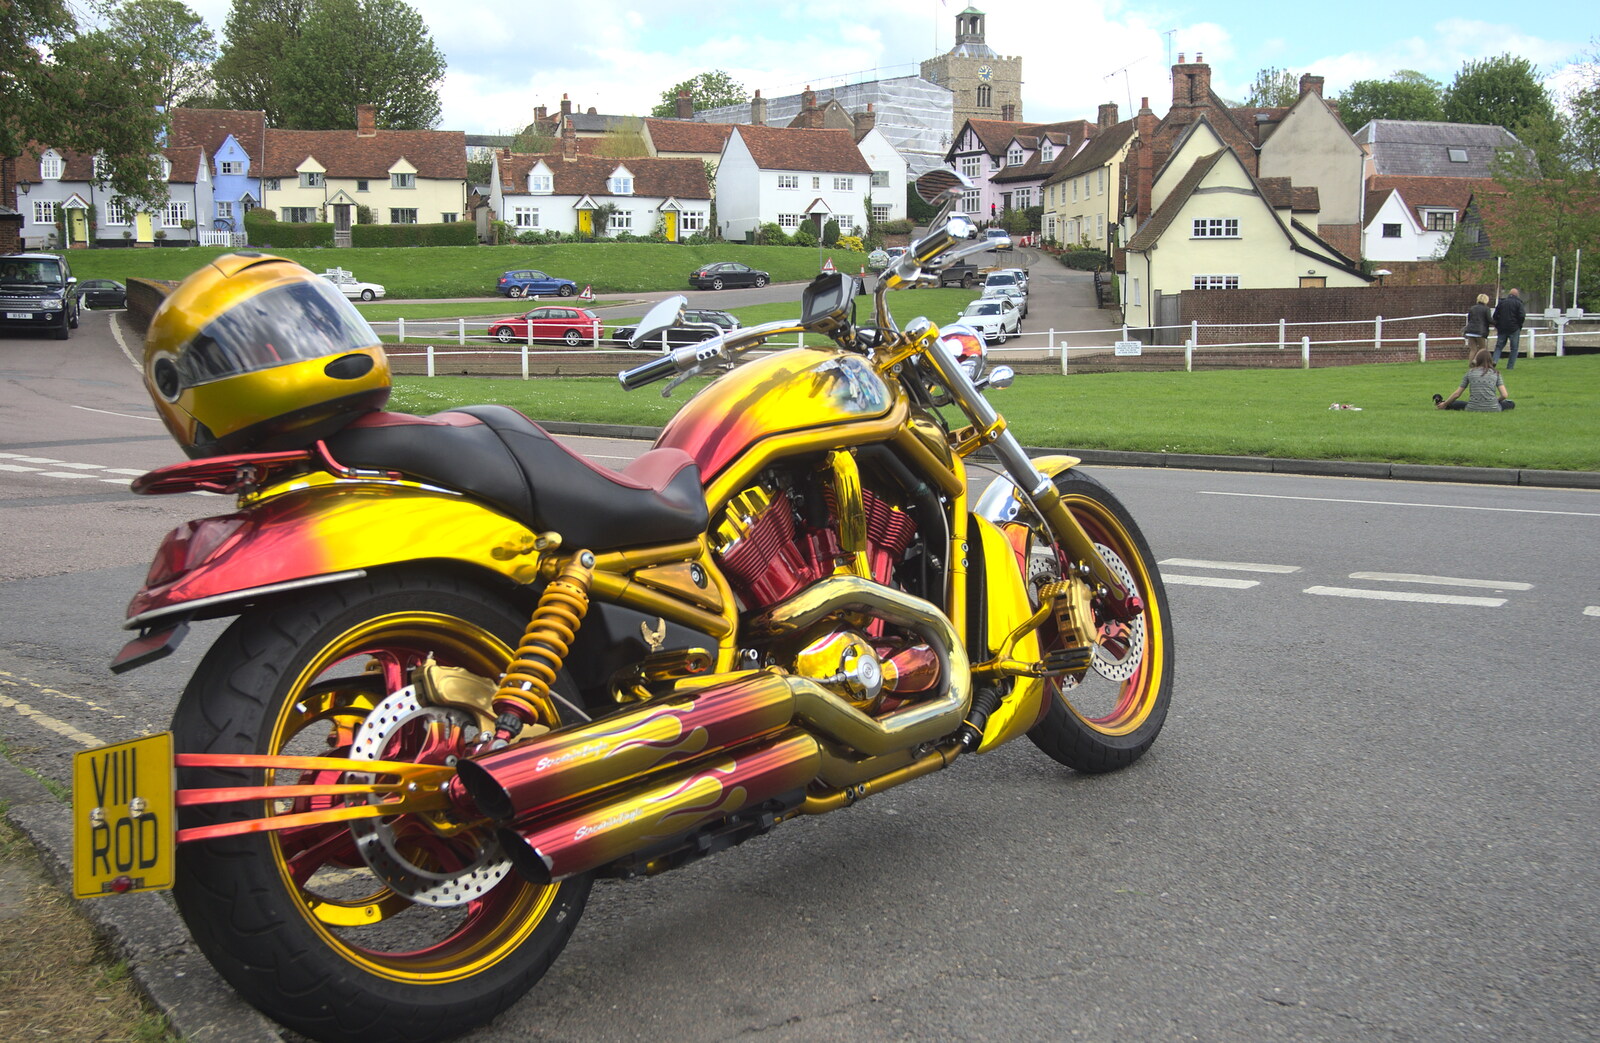 A very blingy red and yellow motorbike from The BSCC Cycling Weekend, The Swan Inn, Thaxted, Essex - 12th May 2012